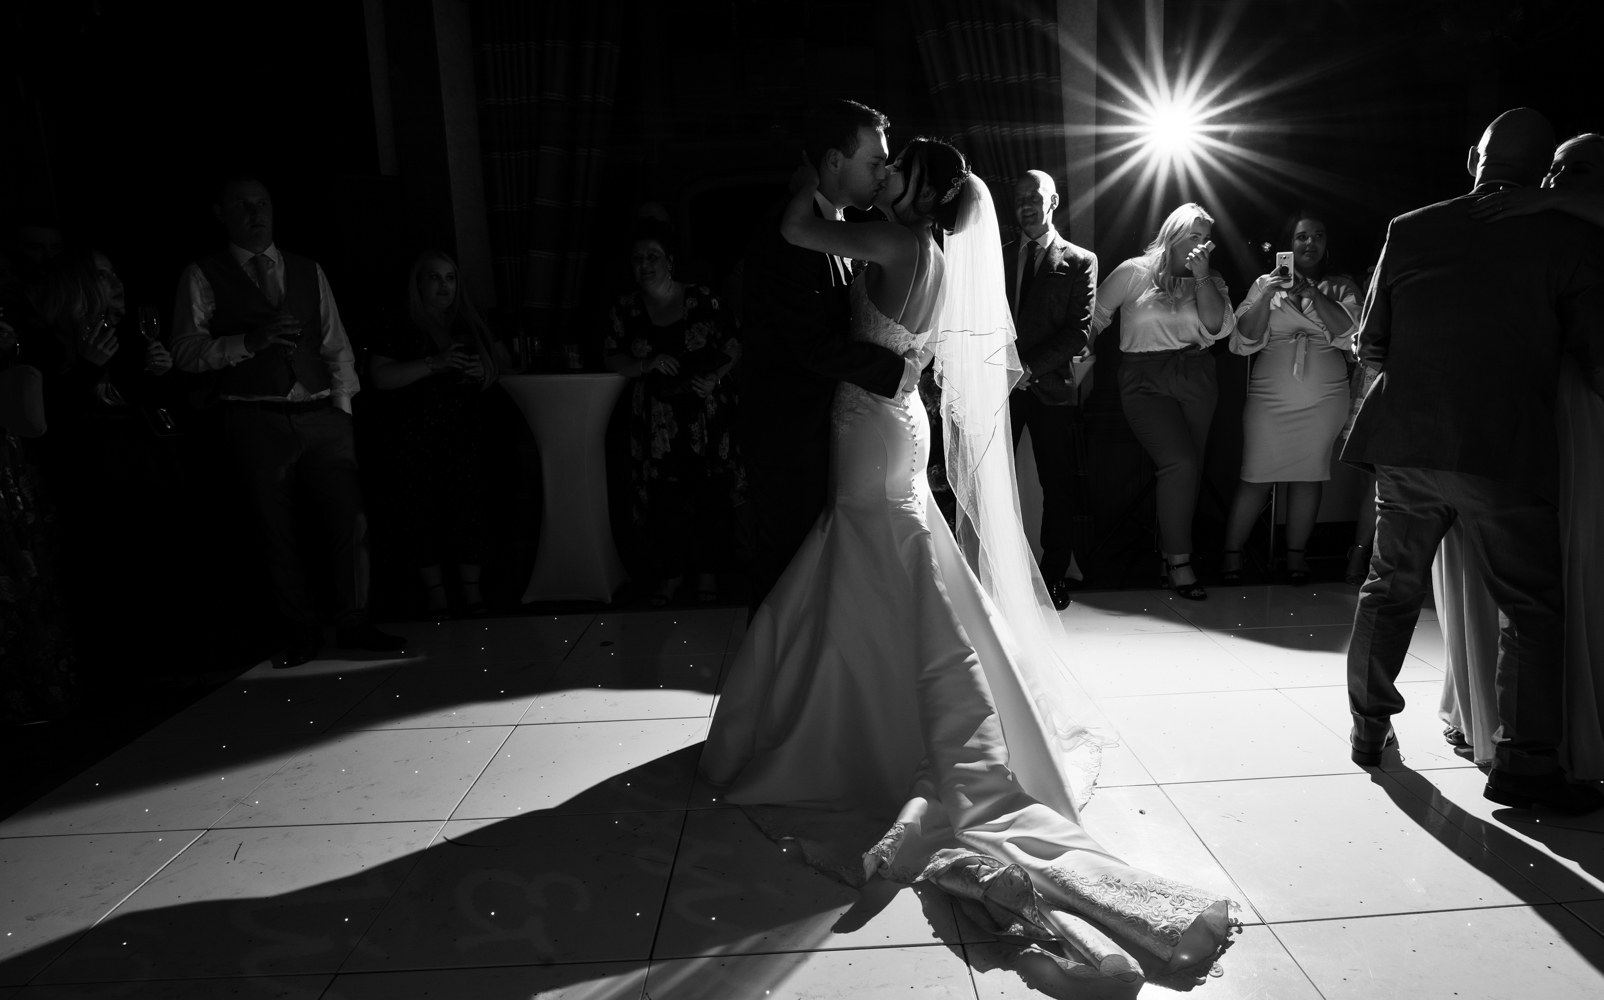 A black and white image of the bride and groom taken during their first dance together